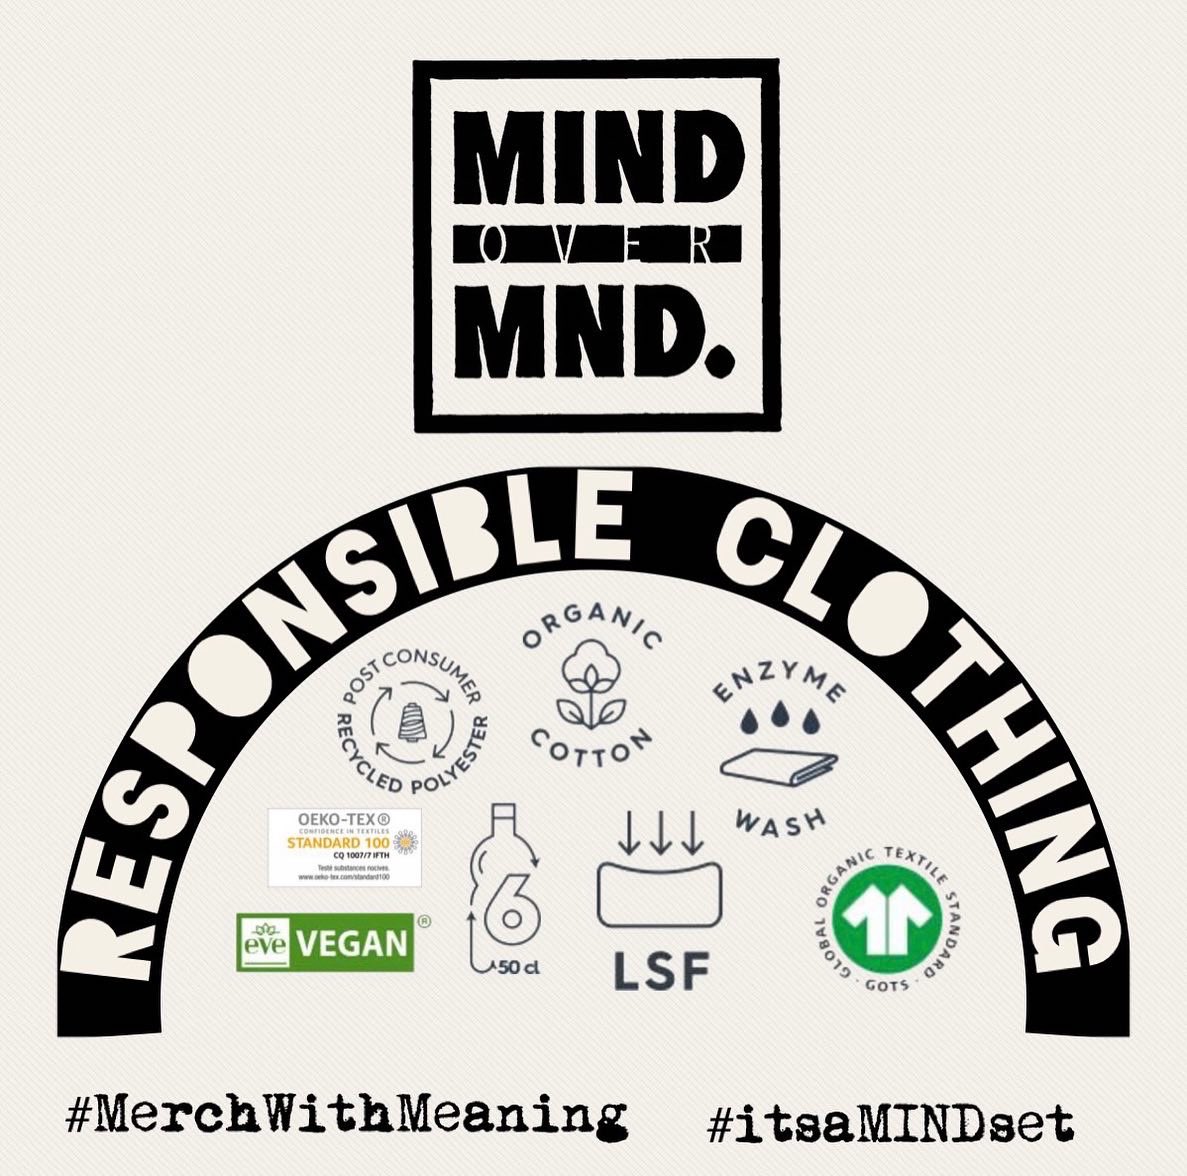 Our clothing line 🖤 Ahead of launch, we want to share details of our merchandise, starting with our clothing, now that we’ve agreed a manufacturer 🫶 Head to our Instagram or Facebook pages for more details of our high-quality eco-friendly garments 🖤 #MerchWithMeaning